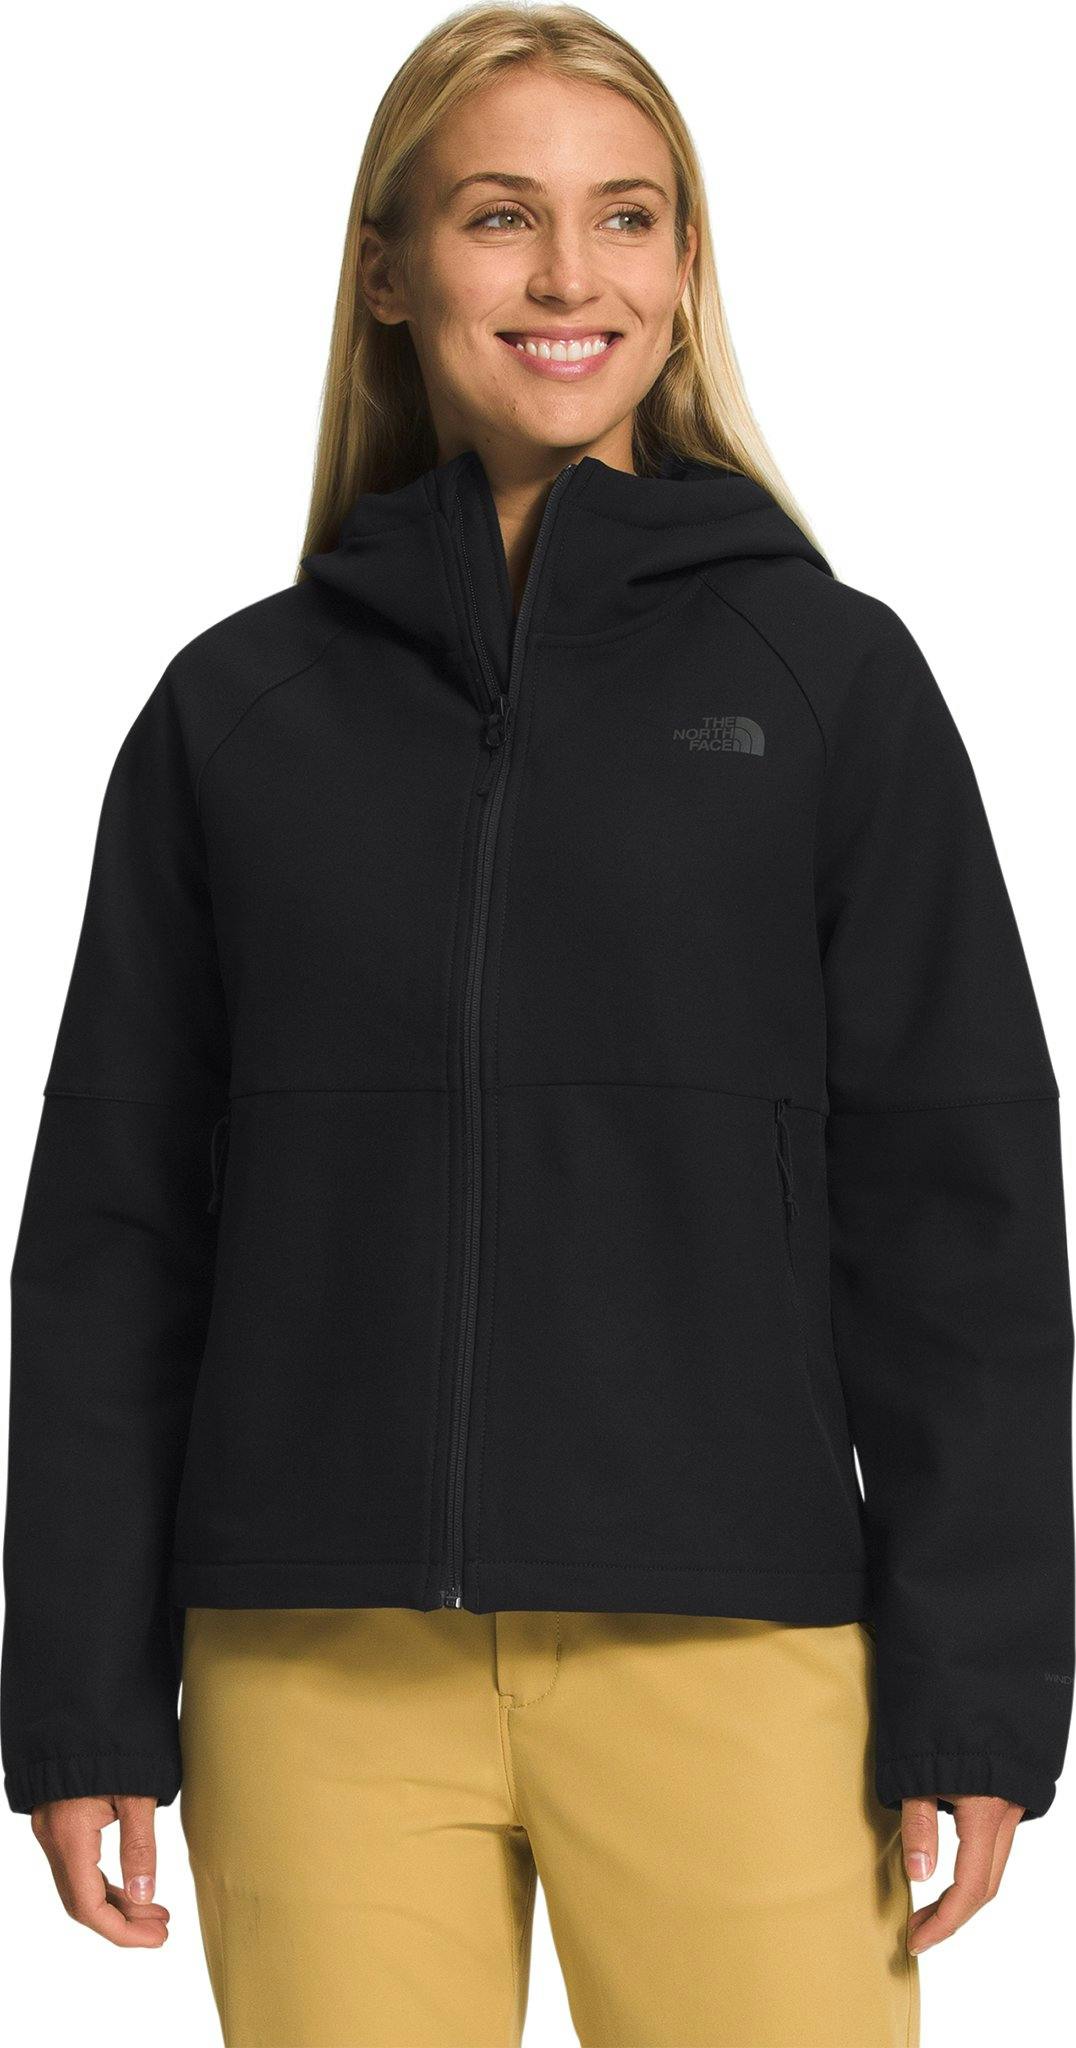 Product image for Camden Soft Shell Hoodie - Women’s